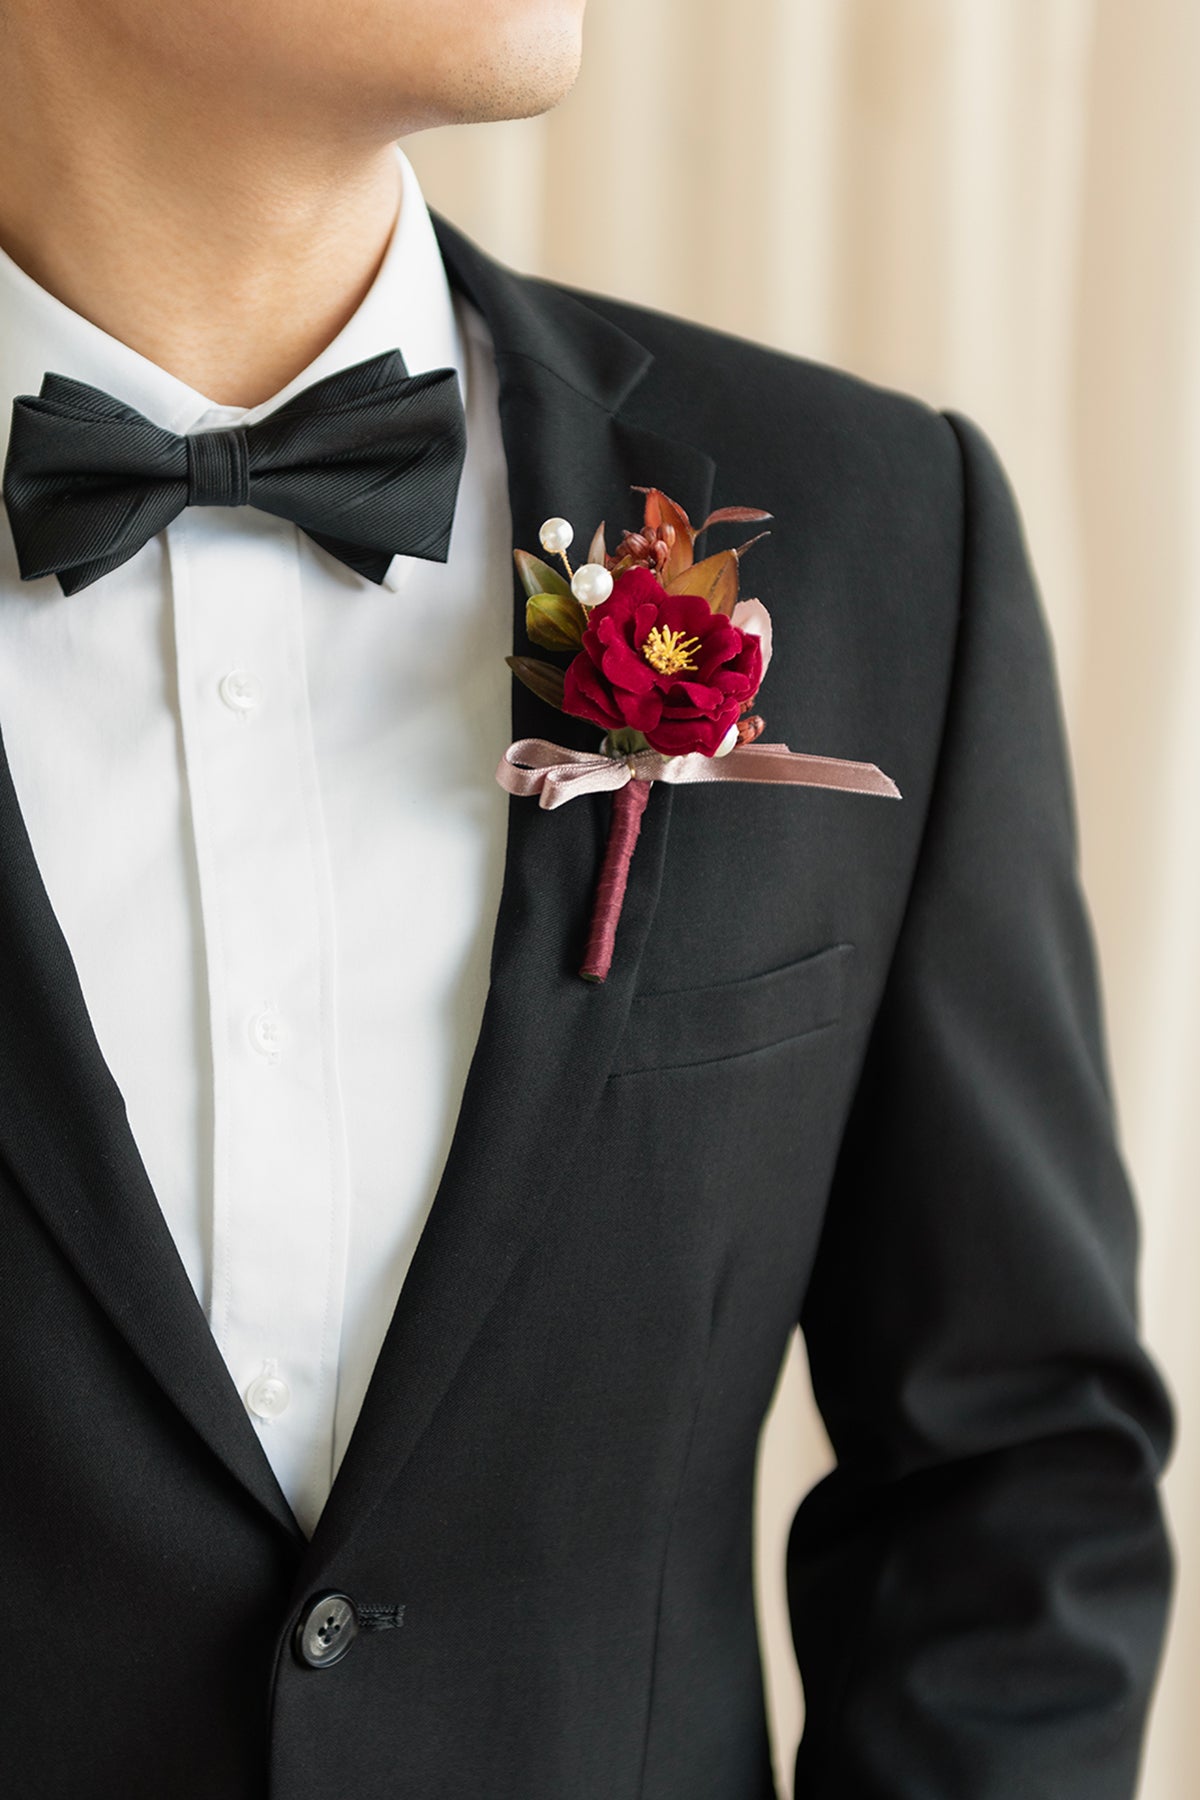 Boutonnieres for Guests in Burgundy & Dusty Rose